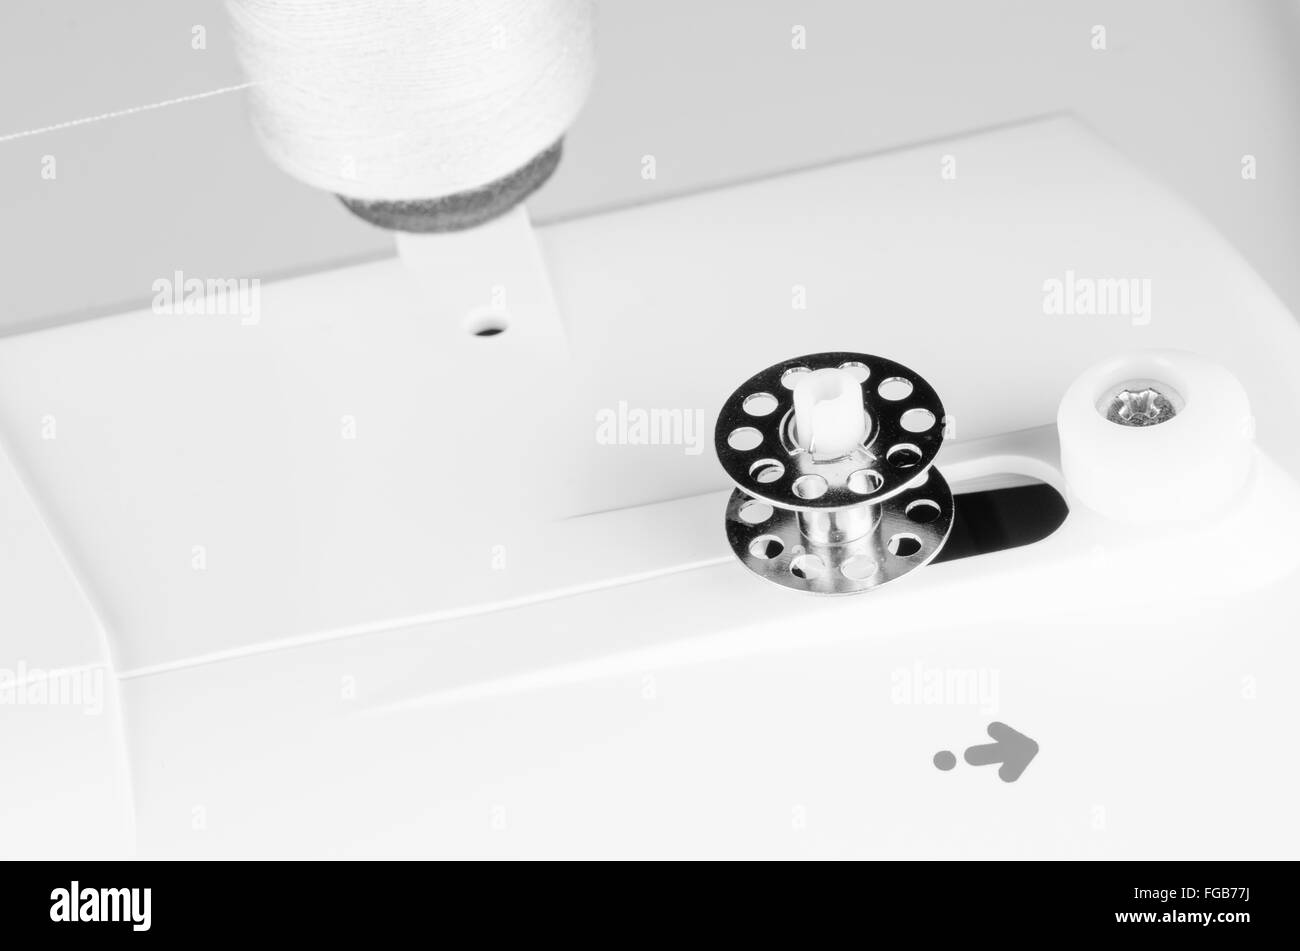 Sewing machine bobbin Black and White Stock Photos & Images - Alamy